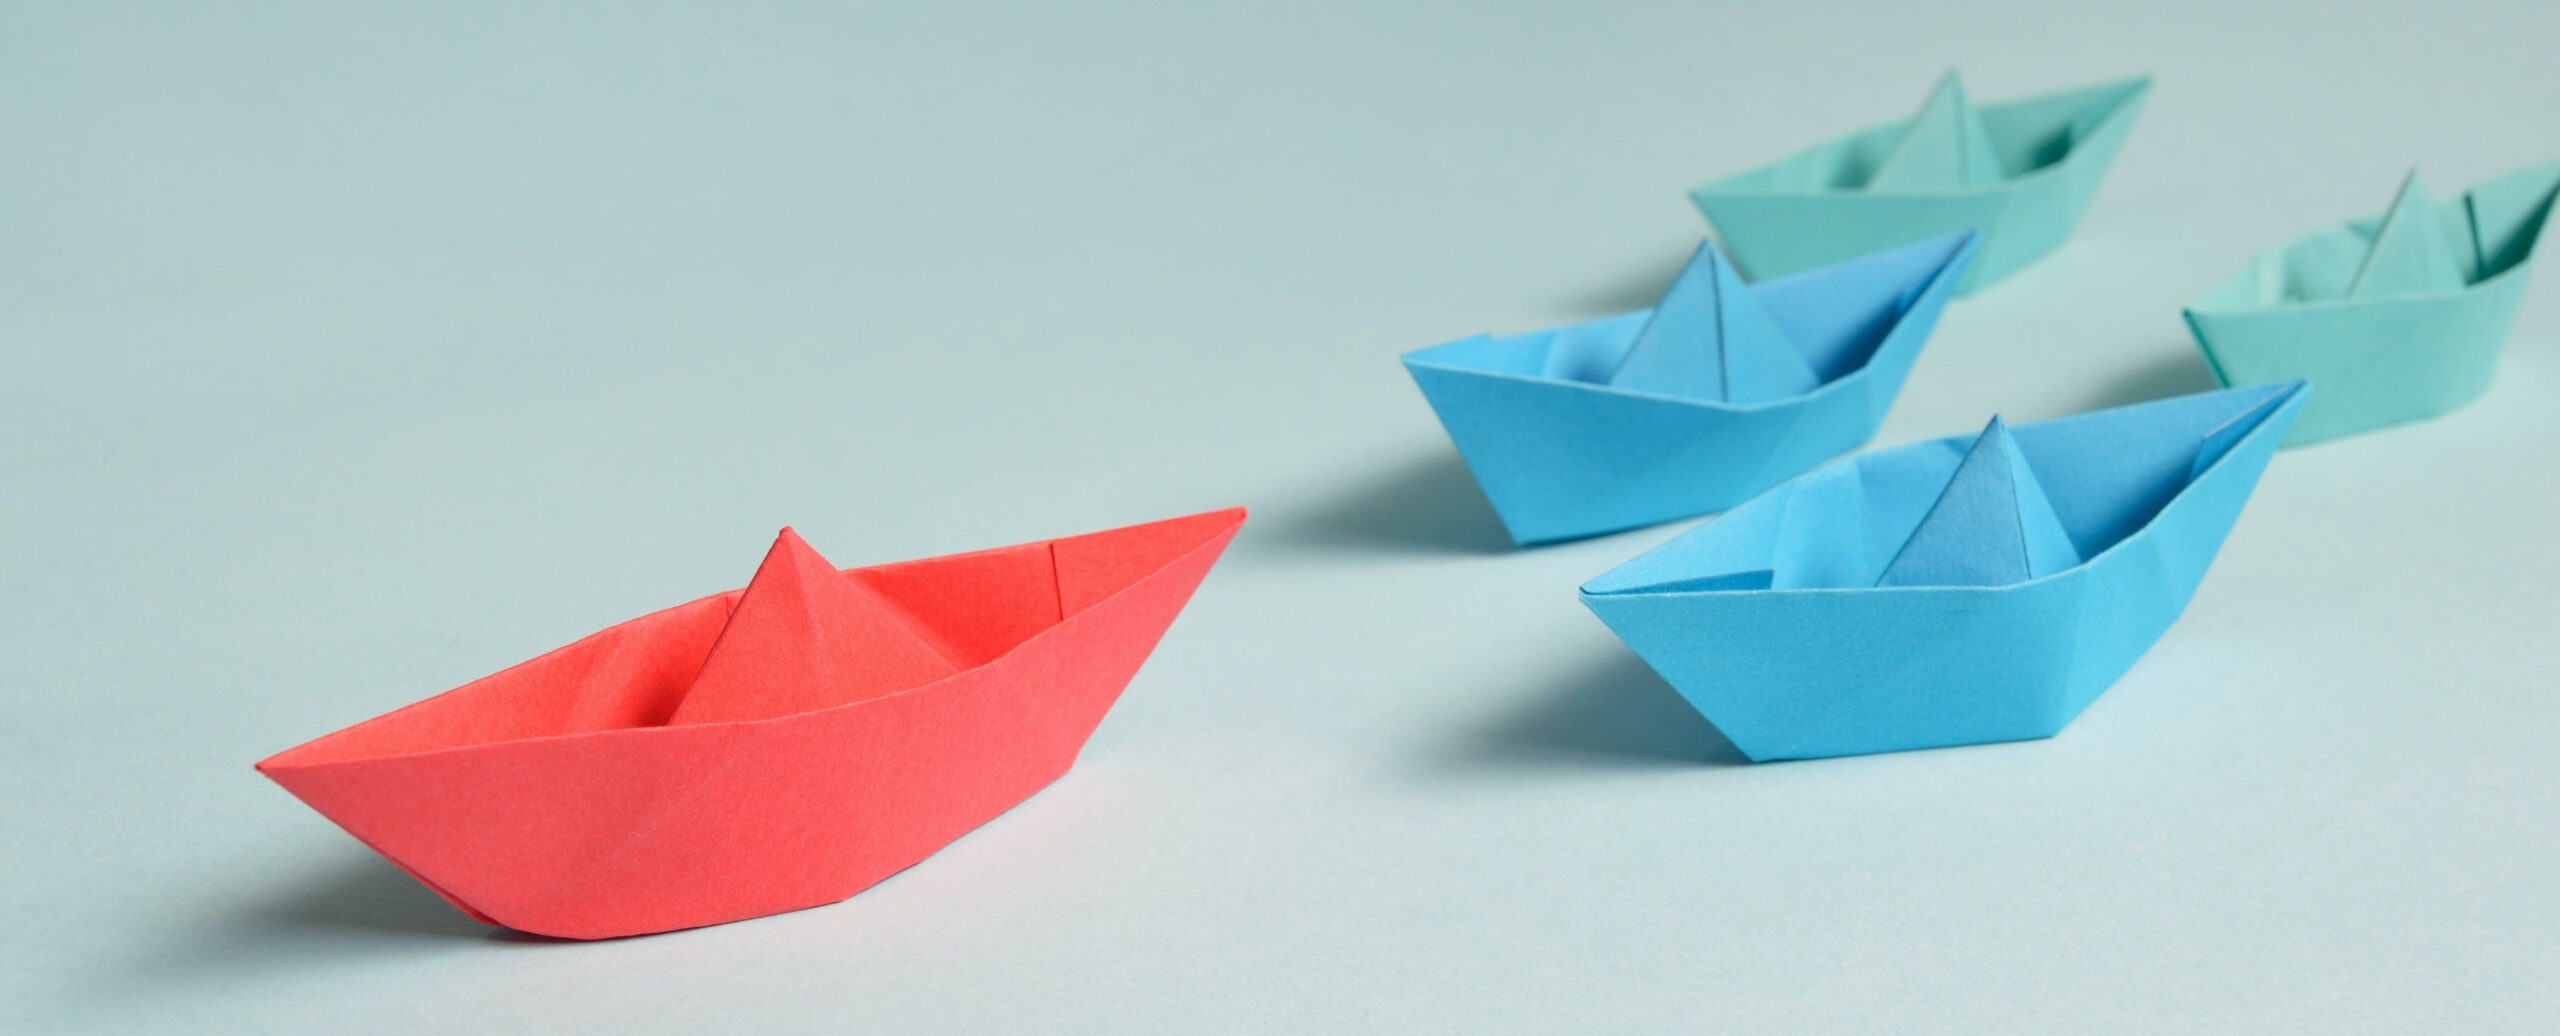 A flotilla of paper boats on a table: a red boat leads the way ahead of two blue and two green boats.